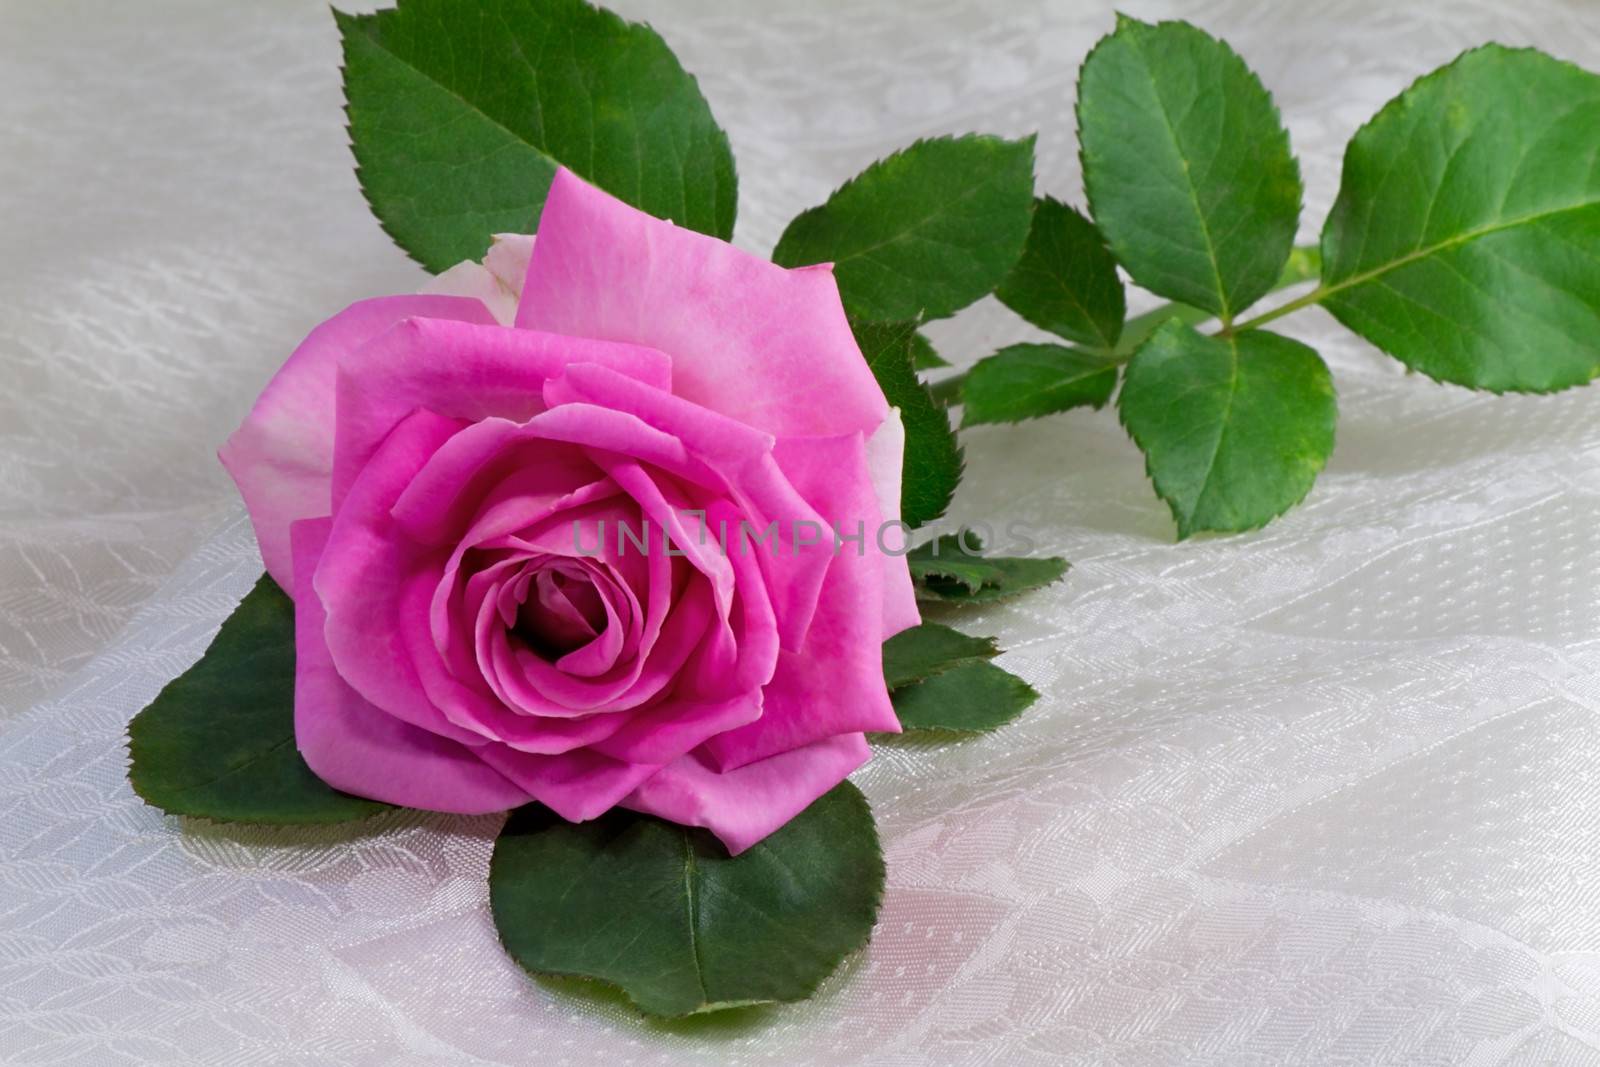 Flower bright pink rose with the leaves on the background of whi by georgina198